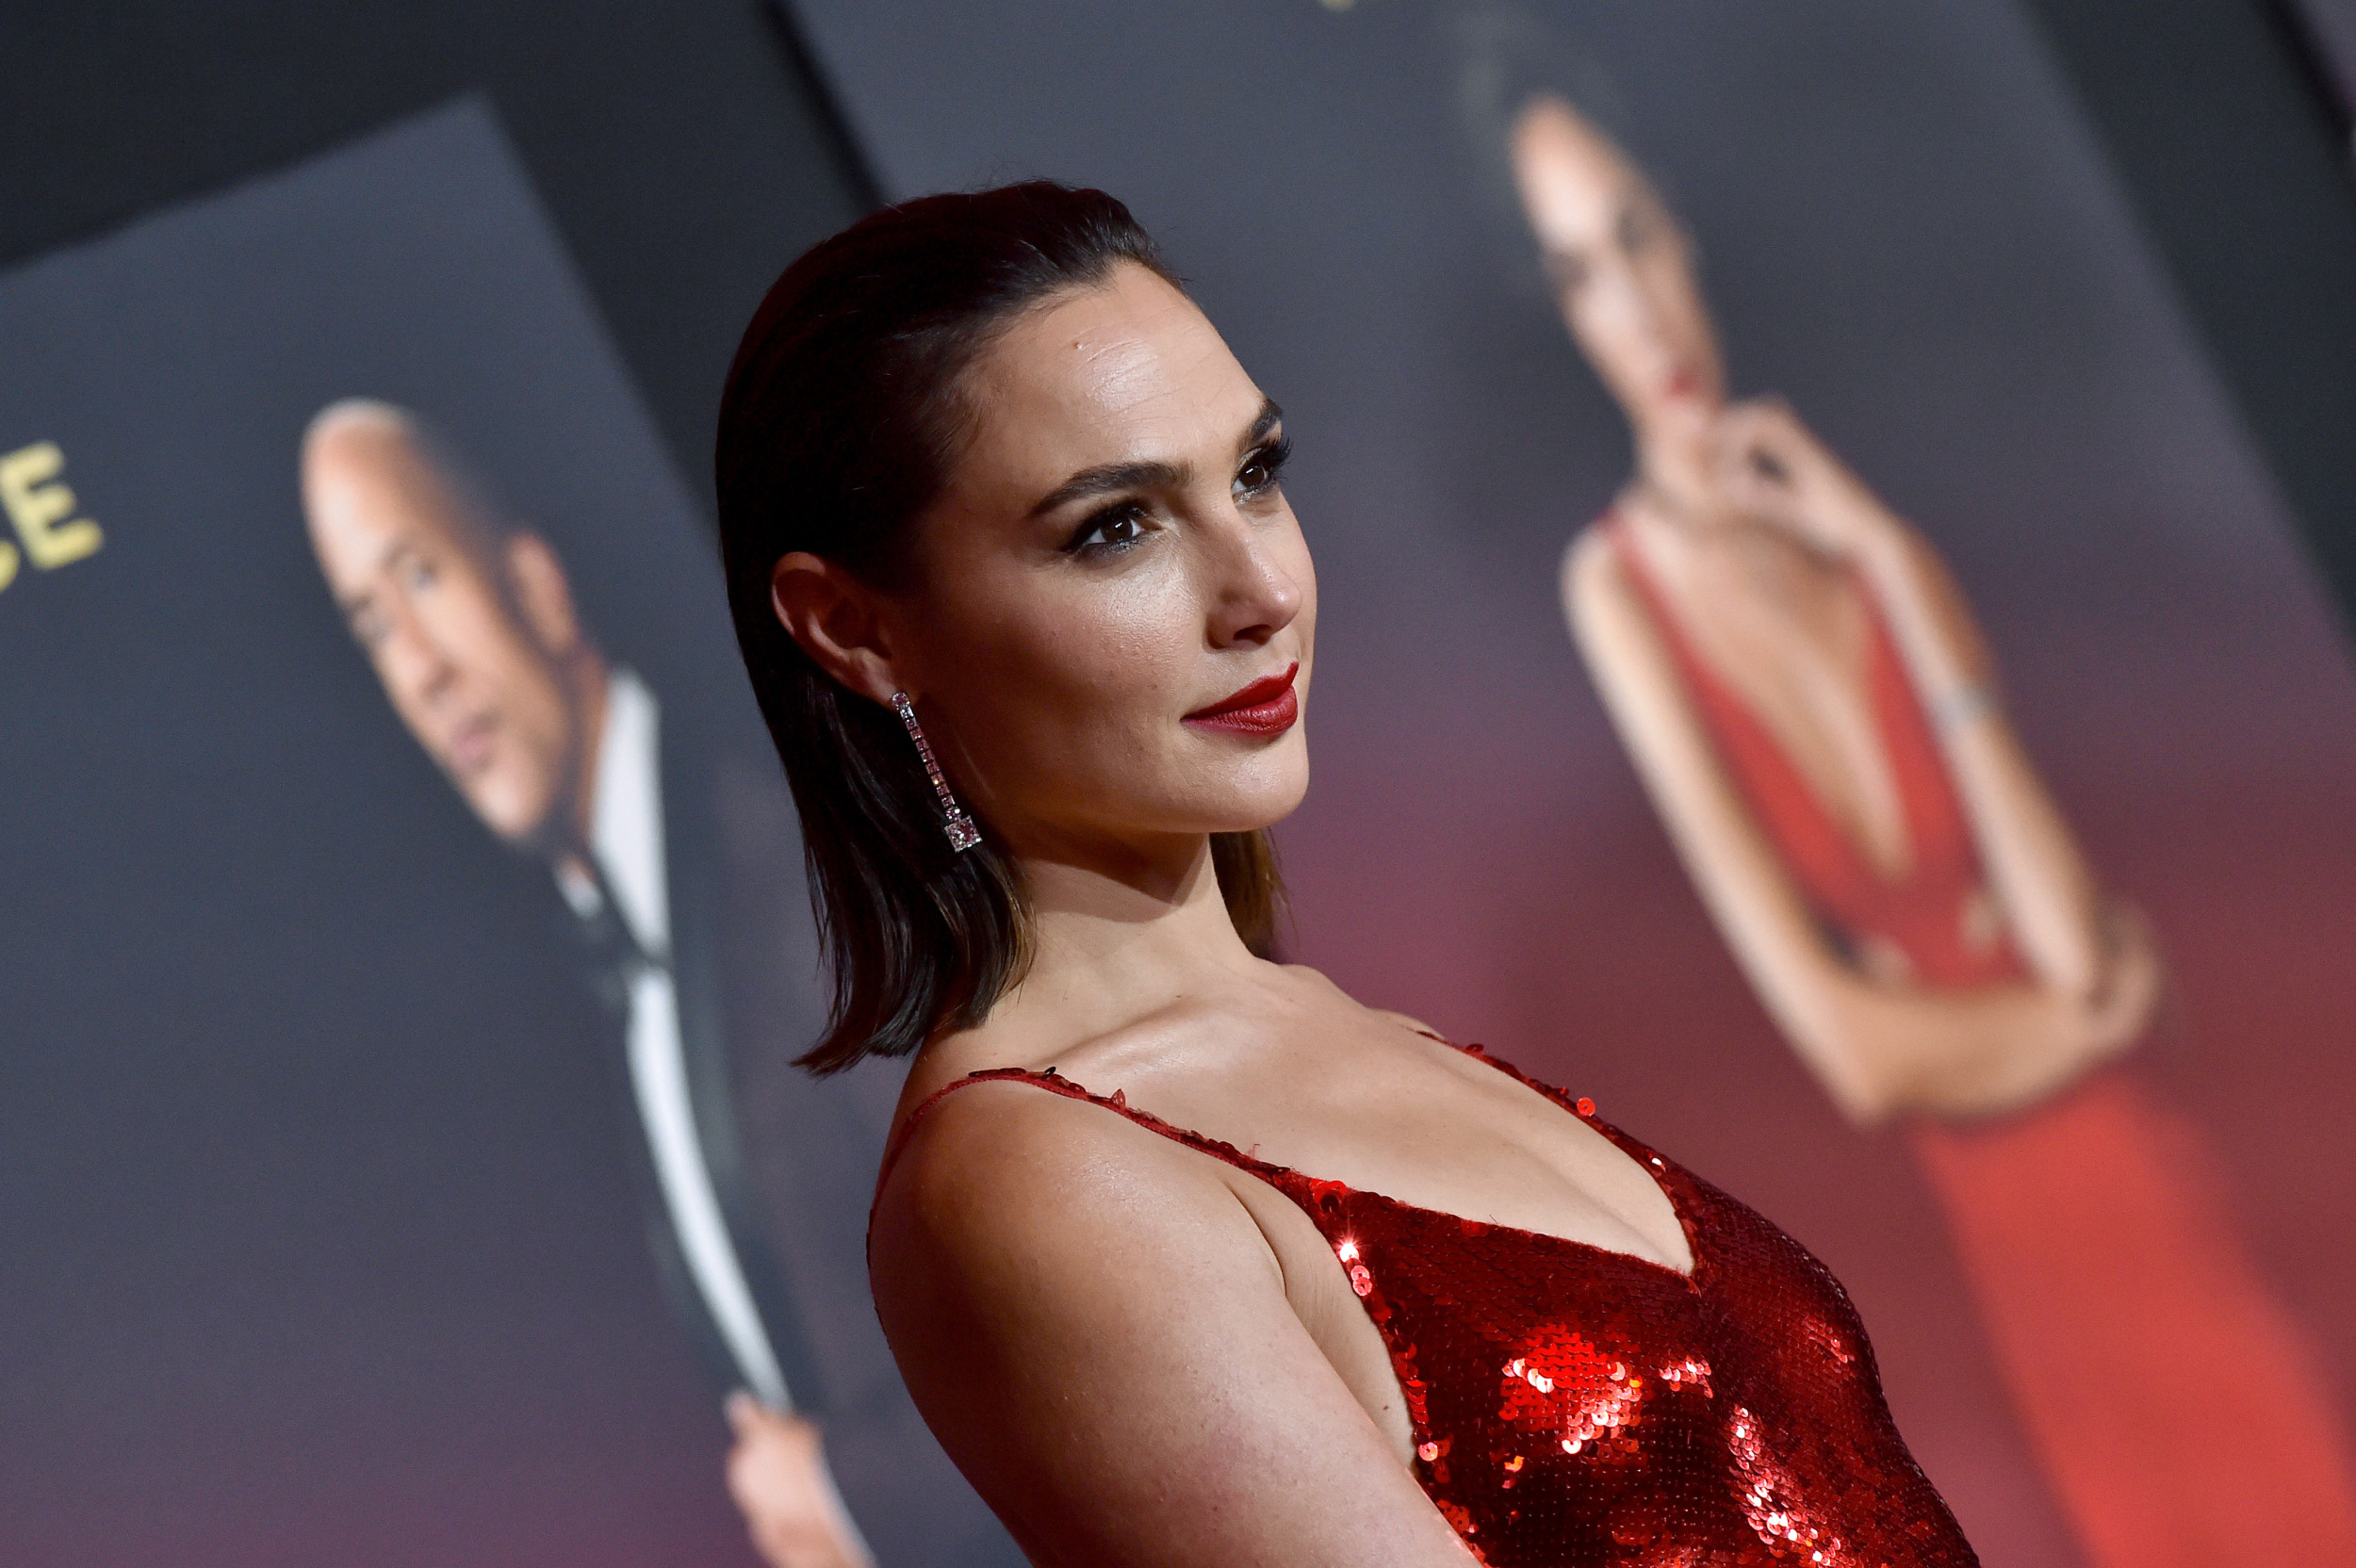 Gal Gadot's sparks hope for her future as Wonder Woman in the DC Universe